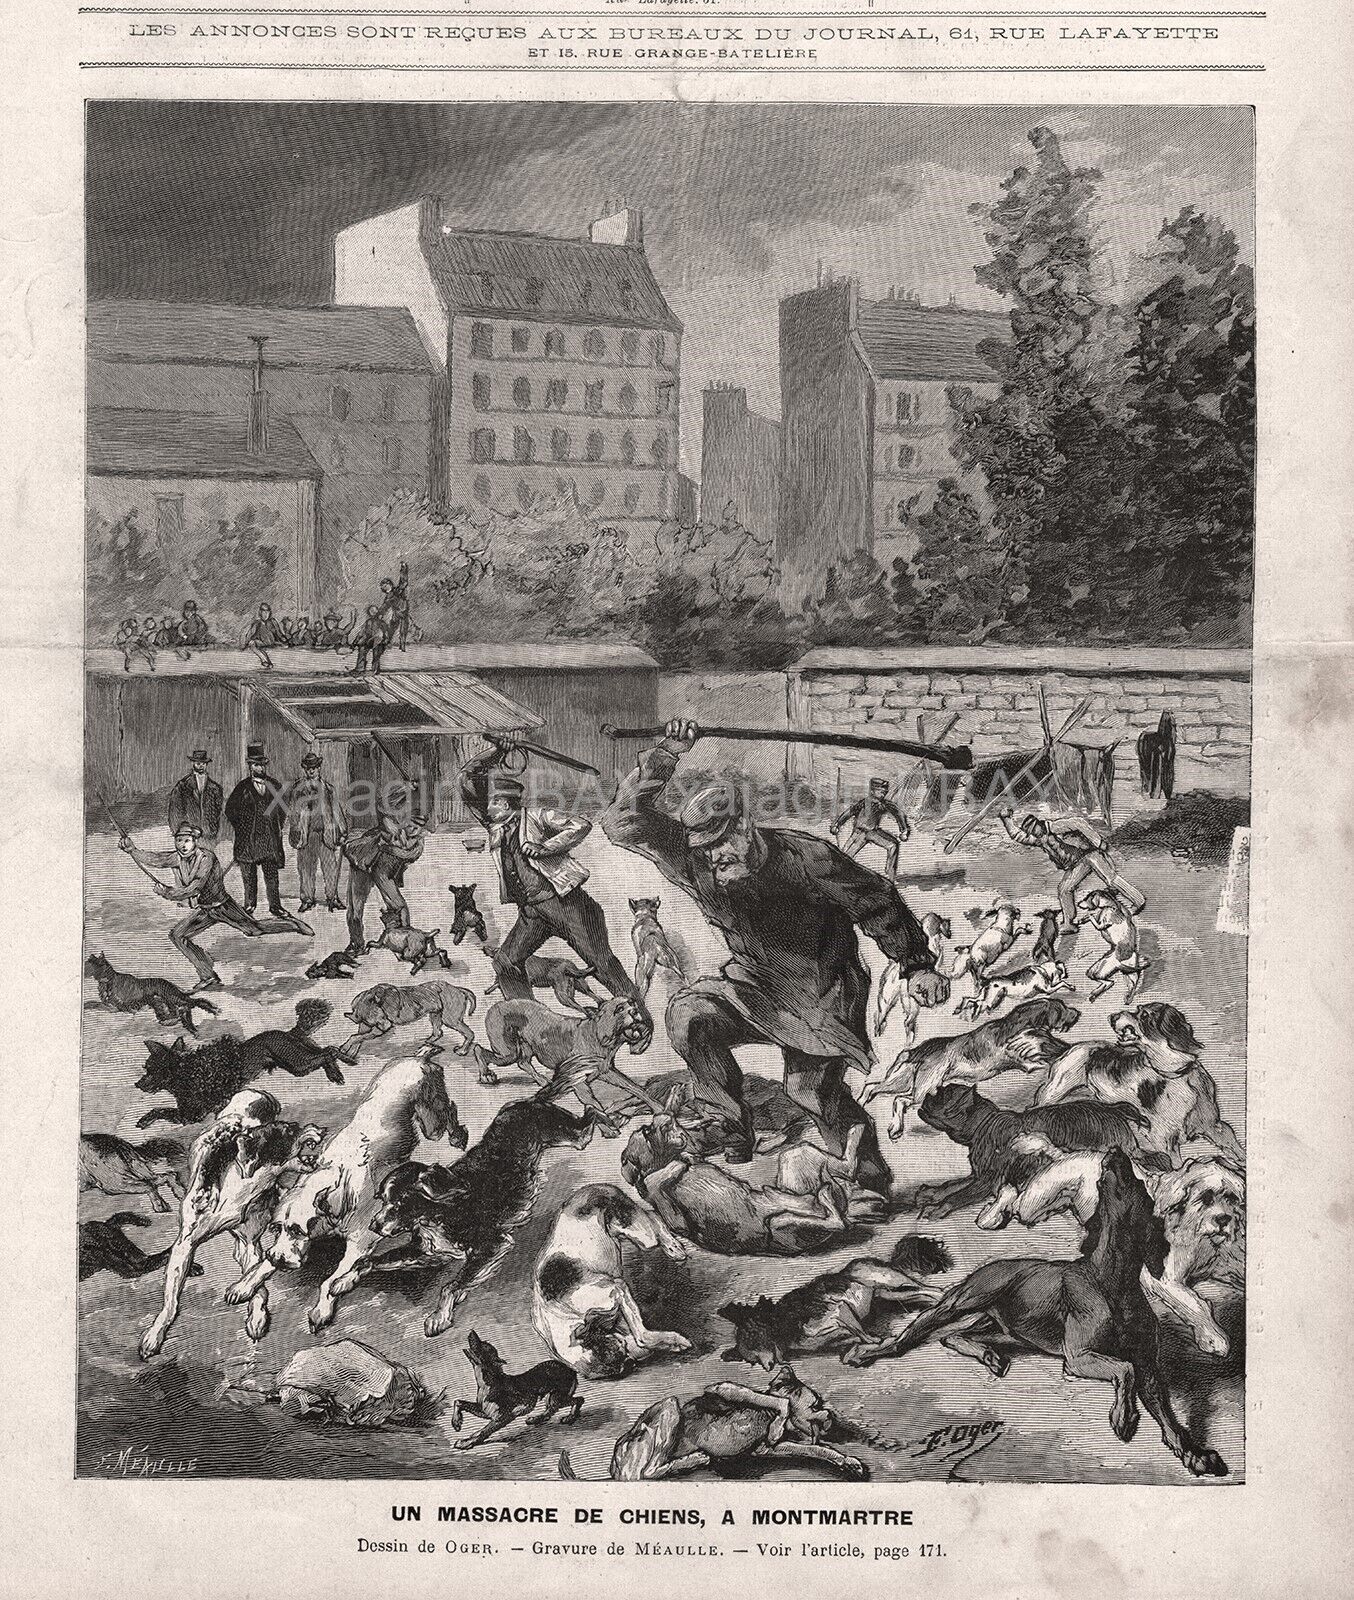 Dog Cruelty Dogs Killed By Police Paris, Rabies Scare, Large 1880s Antique Print